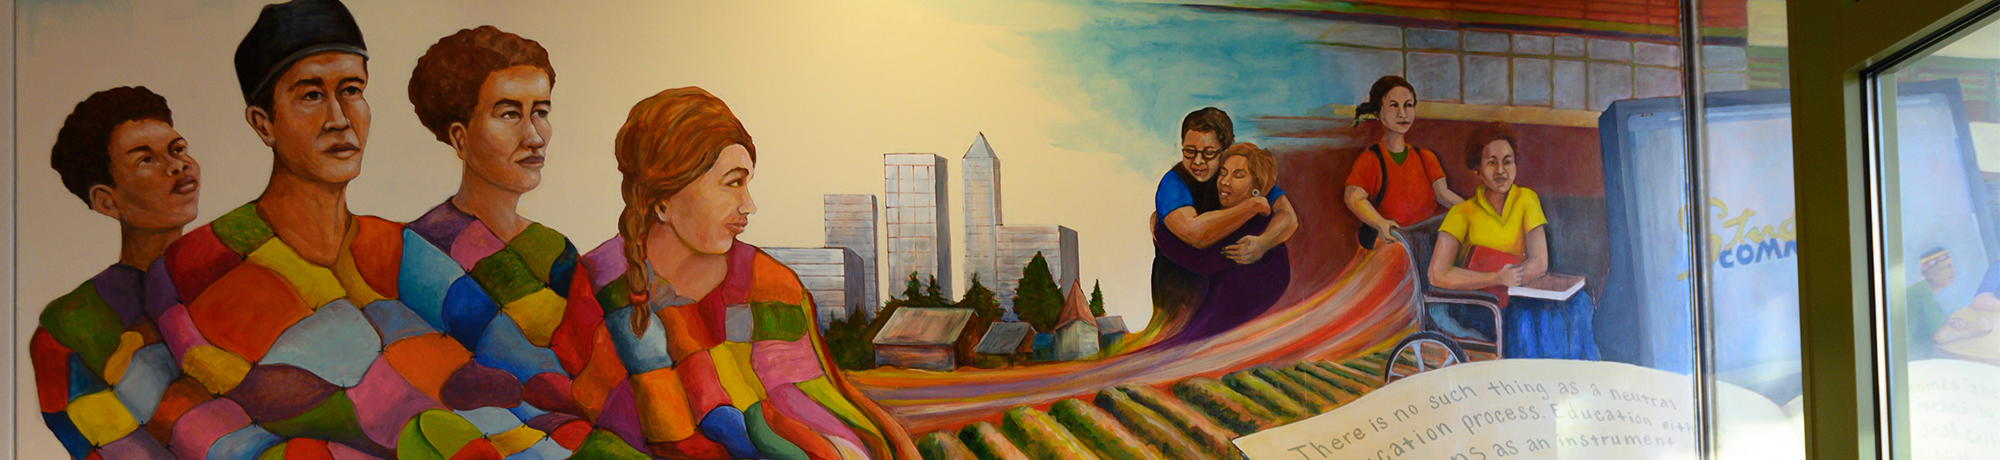 Malaquias Montoya mural at the south entrance to the Student Community Center on February 21, 2020.